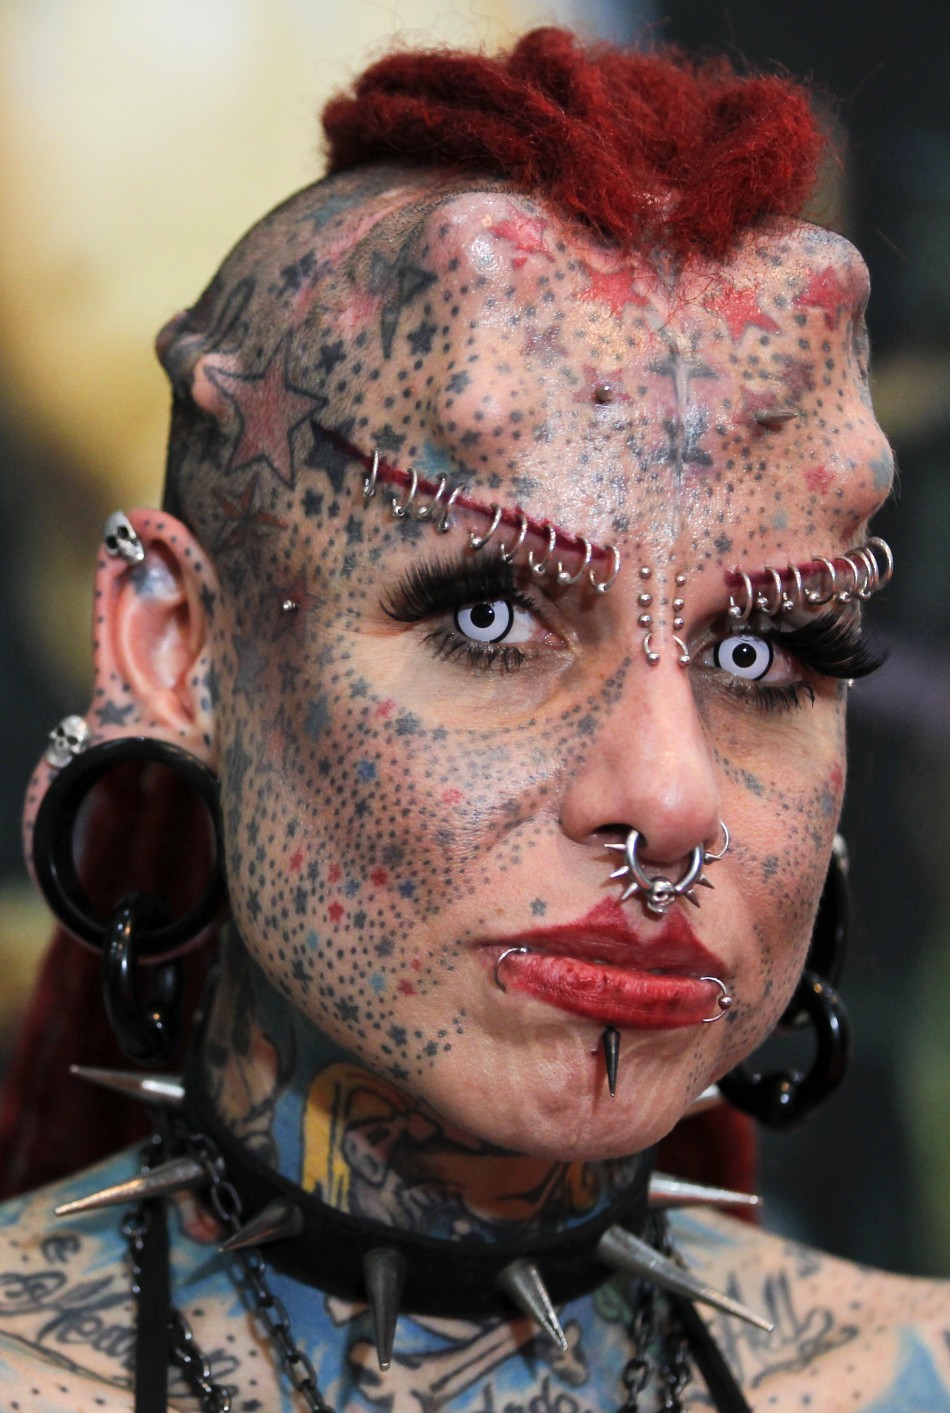 Wild Tattoos, Piercings, and Implants!